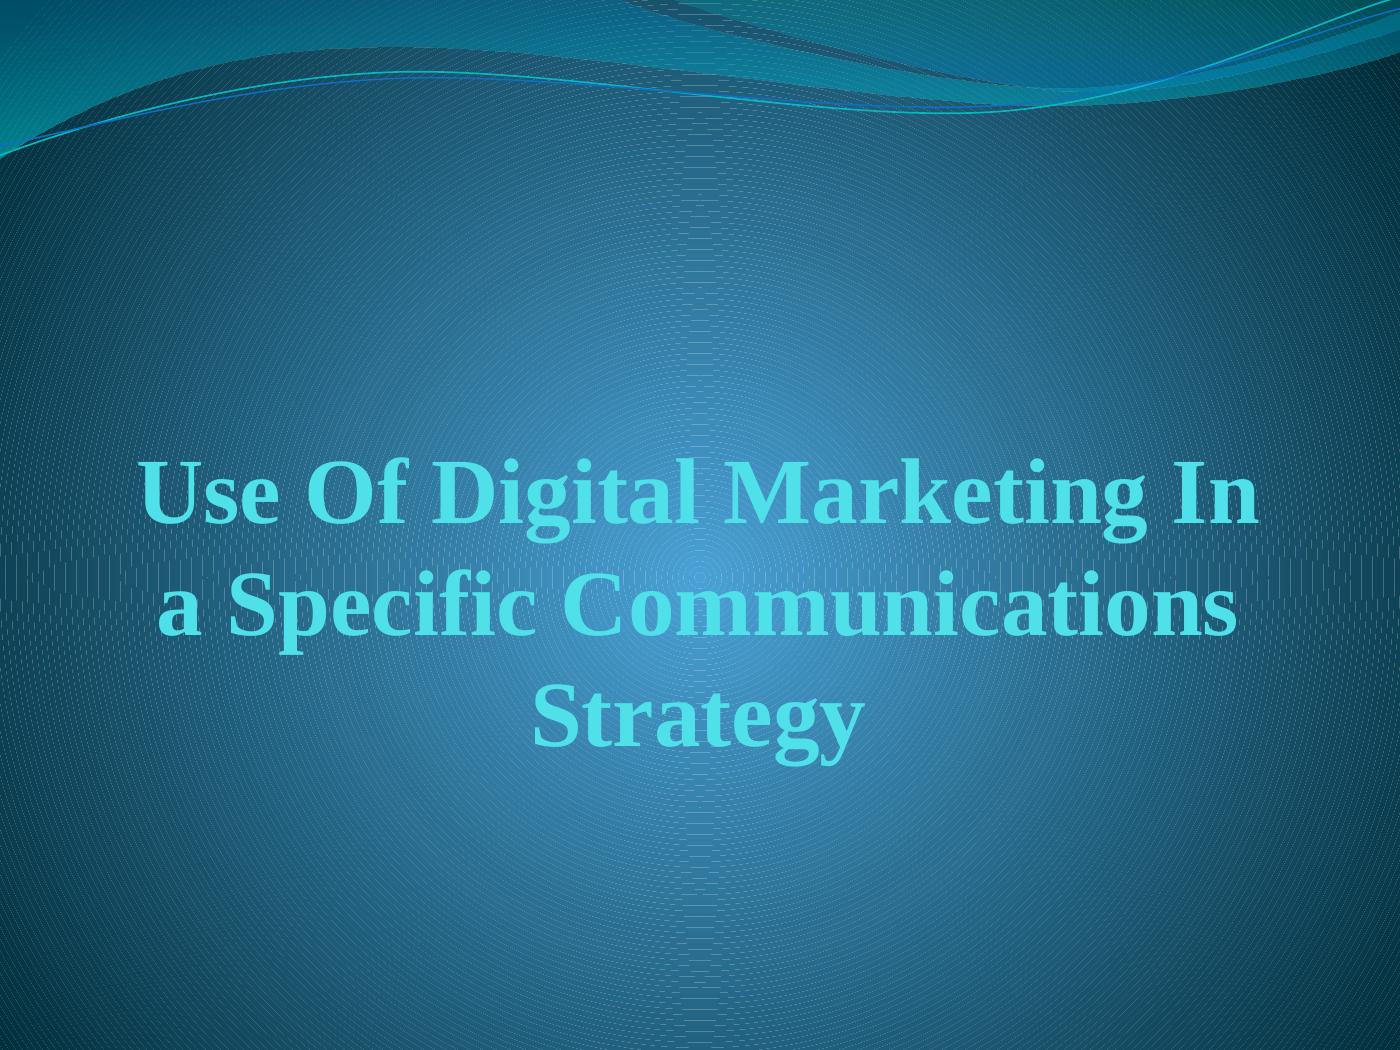 Use Of Digital Marketing In a Specific Communications Strategy_1